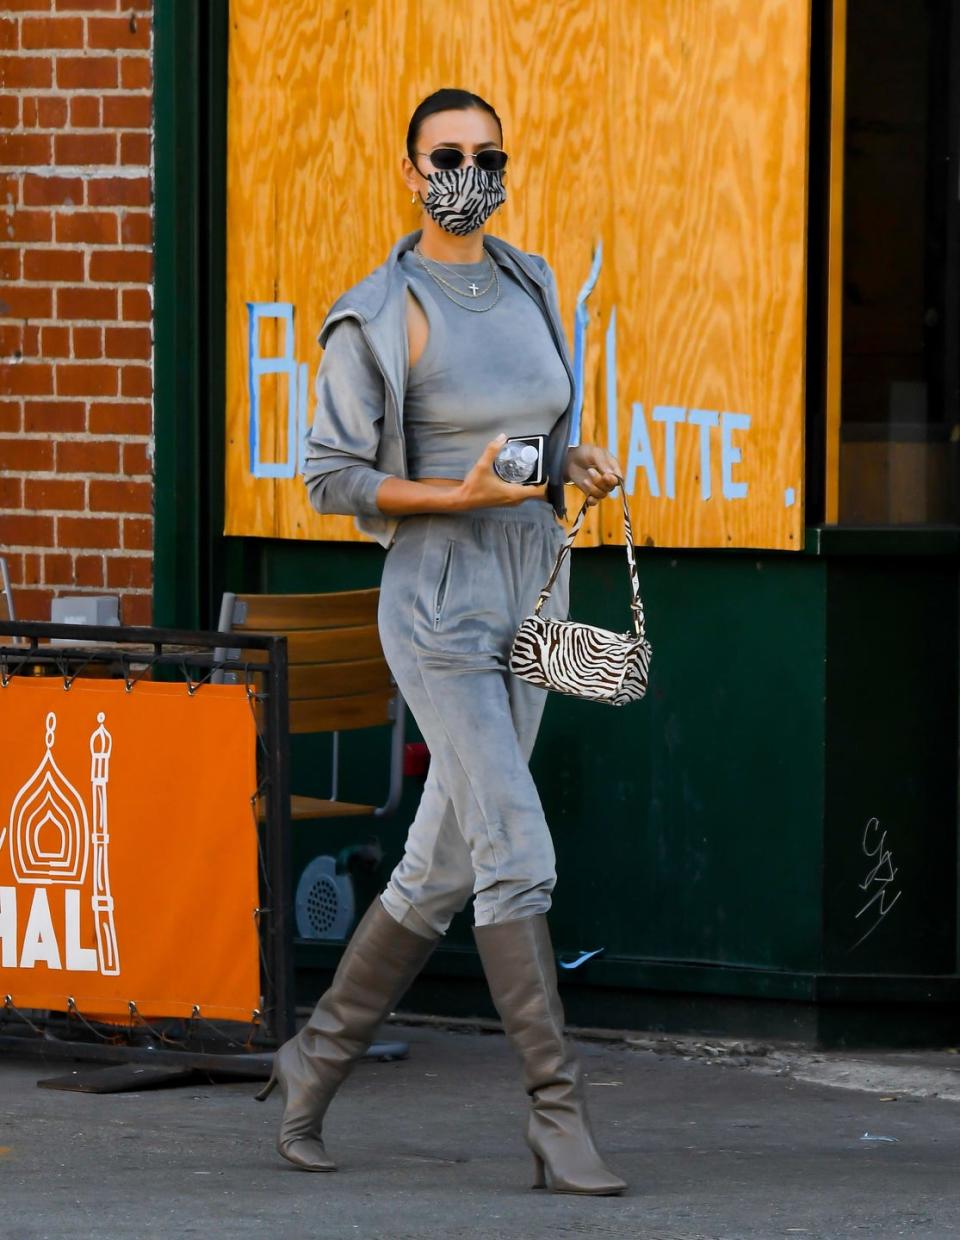 <p>The supermodel was spotted running errands and picking up coffee in New York City on November 9 wearing the comfiest of outfits during the pandemic.</p><p>The 34-year-old wore a grey velour tracksuit from <a href="https://www.elle.com/uk/life-and-culture/g34434604/kim-kardashian-career/" rel="nofollow noopener" target="_blank" data-ylk="slk:Kim Kardashian;elm:context_link;itc:0;sec:content-canvas" class="link ">Kim Kardashian</a>’s shapewear brand <a href="https://www.elle.com/uk/life-and-culture/culture/a33940186/kim-kardashian-homeware-interiors-business/" rel="nofollow noopener" target="_blank" data-ylk="slk:SKIMS;elm:context_link;itc:0;sec:content-canvas" class="link ">SKIMS</a> which consisted of a <a href="https://skims.com/products/velour-hoodie-smoke" rel="nofollow noopener" target="_blank" data-ylk="slk:hoodie;elm:context_link;itc:0;sec:content-canvas" class="link ">hoodie</a>, <a href="https://skims.com/products/velour-crew-neck-tank-smoke" rel="nofollow noopener" target="_blank" data-ylk="slk:crew neck vest top;elm:context_link;itc:0;sec:content-canvas" class="link ">crew neck vest top</a> and jogging <a href="https://skims.com/products/velour-jogger-smoke" rel="nofollow noopener" target="_blank" data-ylk="slk:bottoms;elm:context_link;itc:0;sec:content-canvas" class="link ">bottoms</a>. She teamed the look with a zebra-print mask and matching printed handbag, black sunglasses and grey pointed knee-high boots.</p><p><a class="link " href="https://www.marksandspencer.com/pure-cashmere-textured-joggers/p/clp60459655?color=GREYMIX" rel="nofollow noopener" target="_blank" data-ylk="slk:SHOP GREY CASHMERE JOGGERS;elm:context_link;itc:0;sec:content-canvas">SHOP GREY CASHMERE JOGGERS</a></p><p><a class="link " href="https://www.net-a-porter.com/en-gb/shop/product/gianvito-rossi/85-suede-knee-boots/1289482" rel="nofollow noopener" target="_blank" data-ylk="slk:SHOP SIMILAR GREY BOOTS;elm:context_link;itc:0;sec:content-canvas">SHOP SIMILAR GREY BOOTS</a></p>